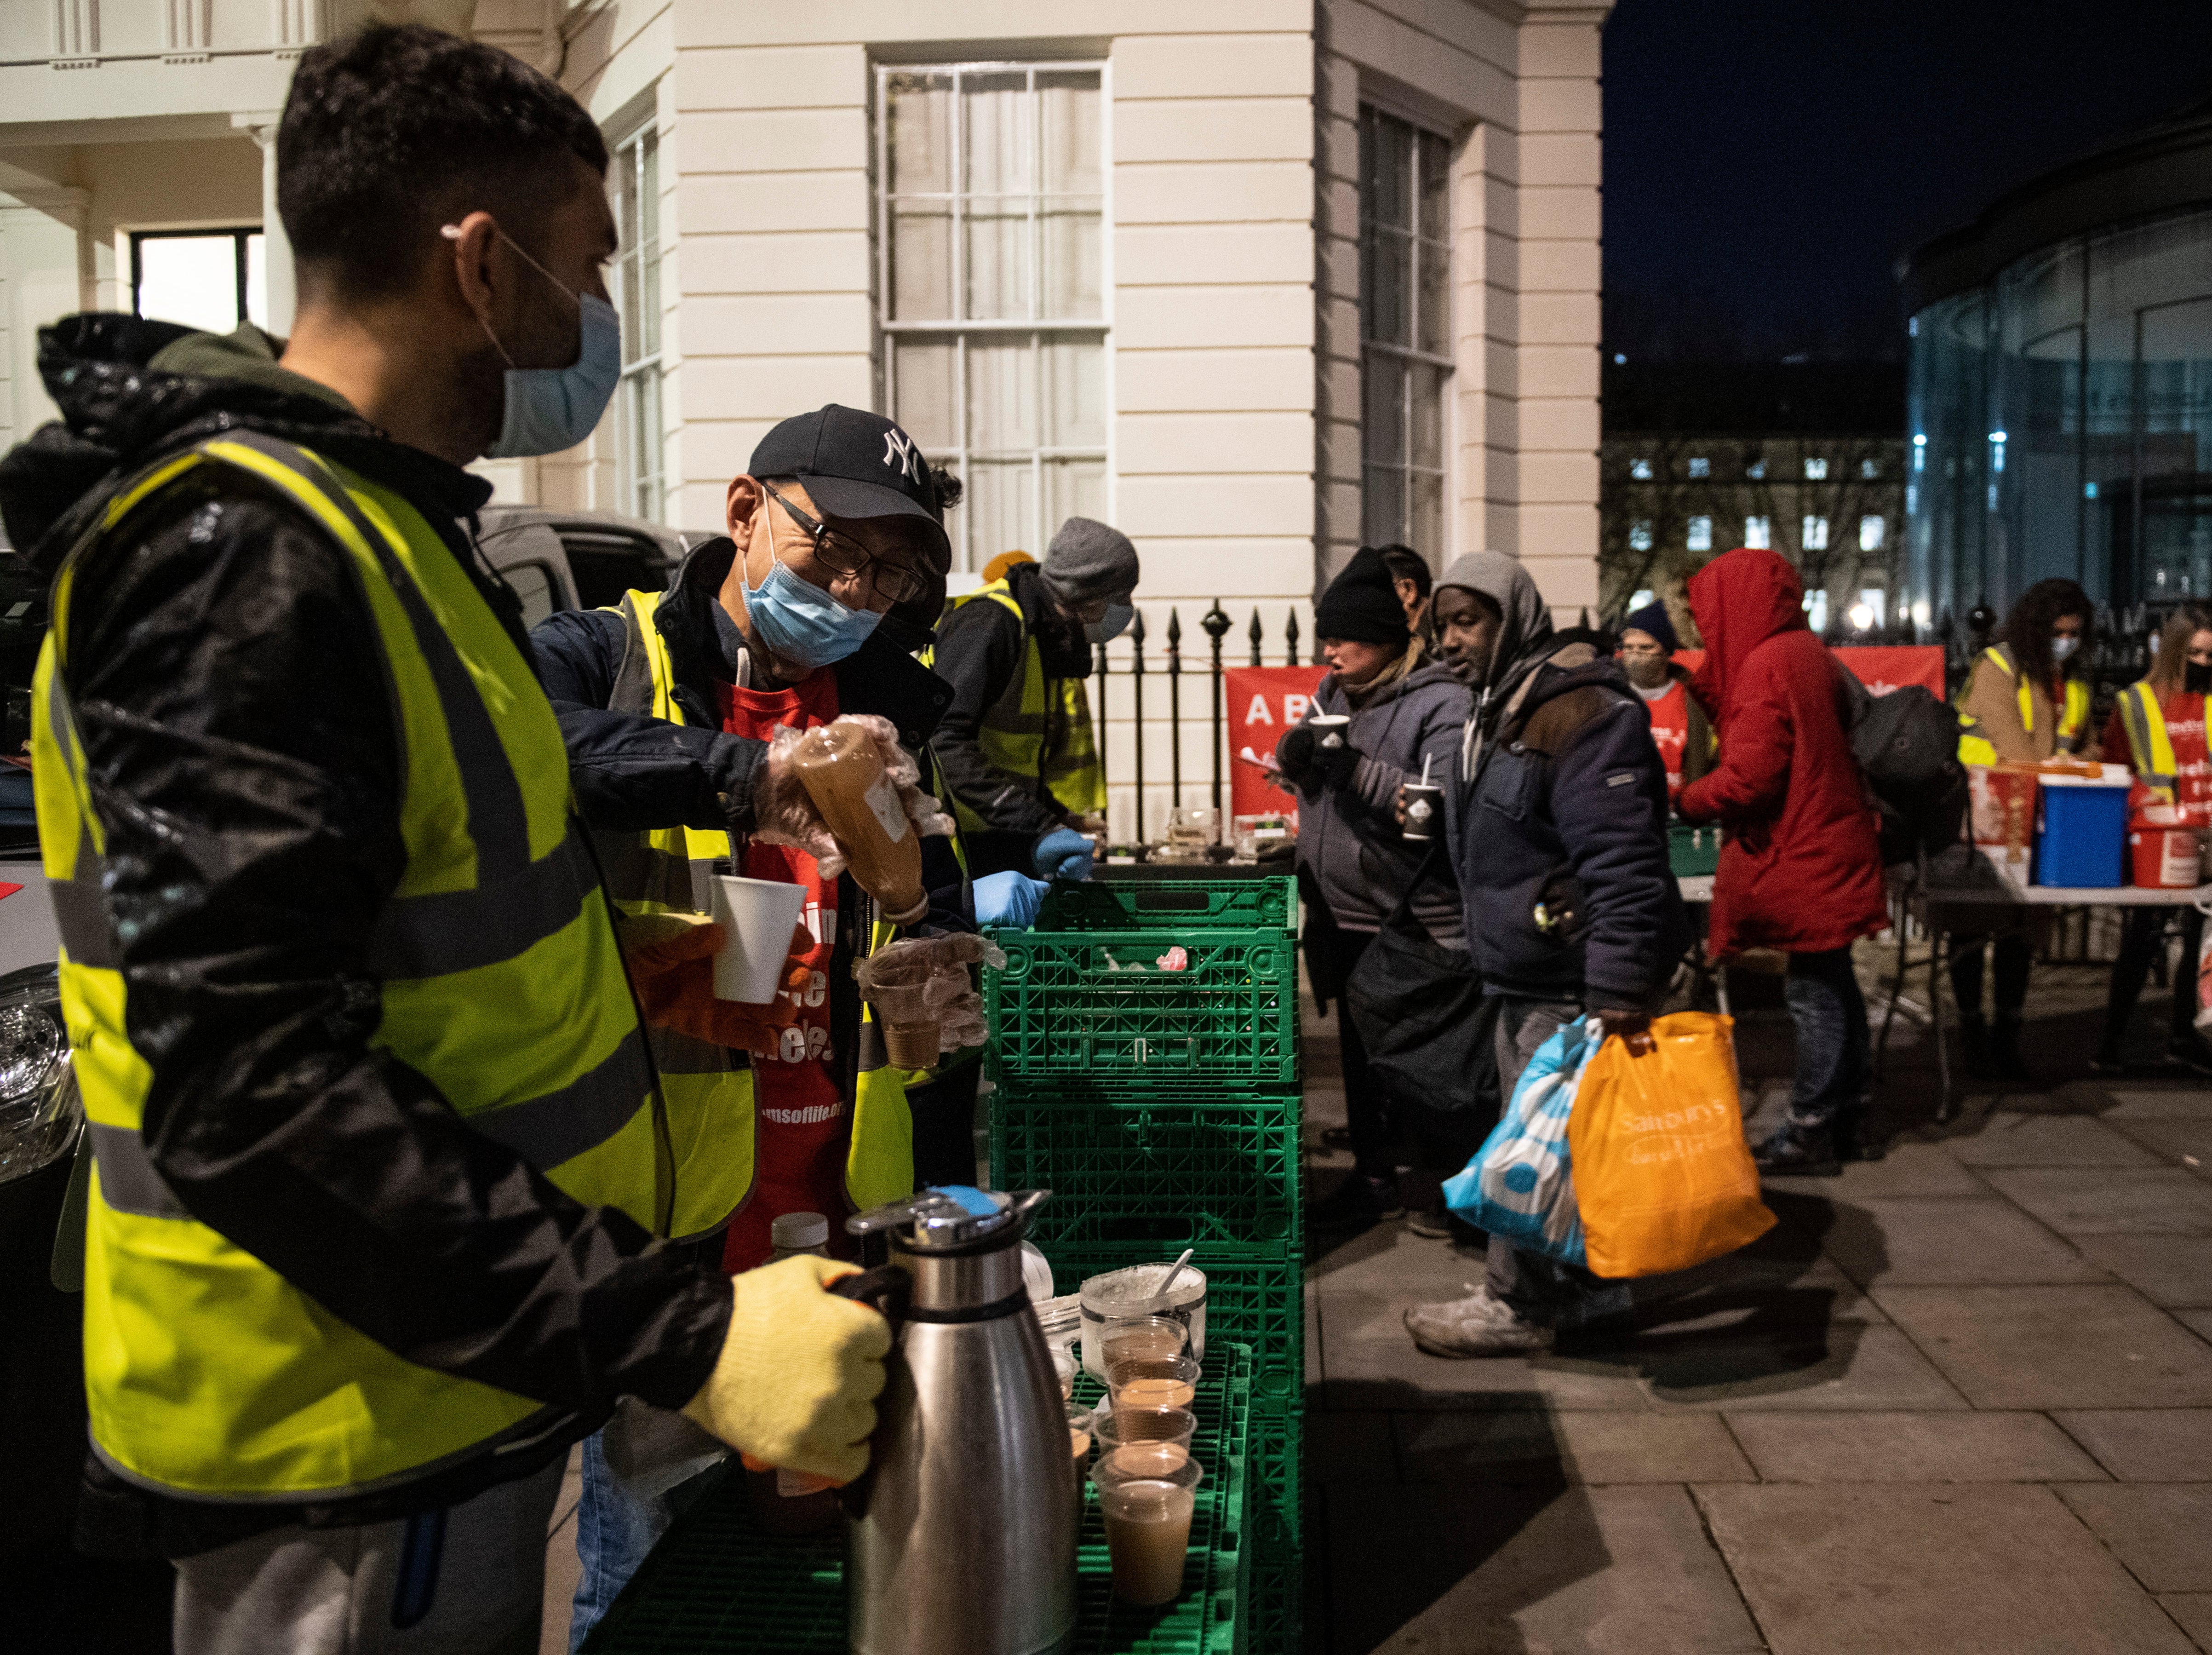 Homeless people collect donated food provided by the Rhythms of Life charity near Trafalgar Square, London